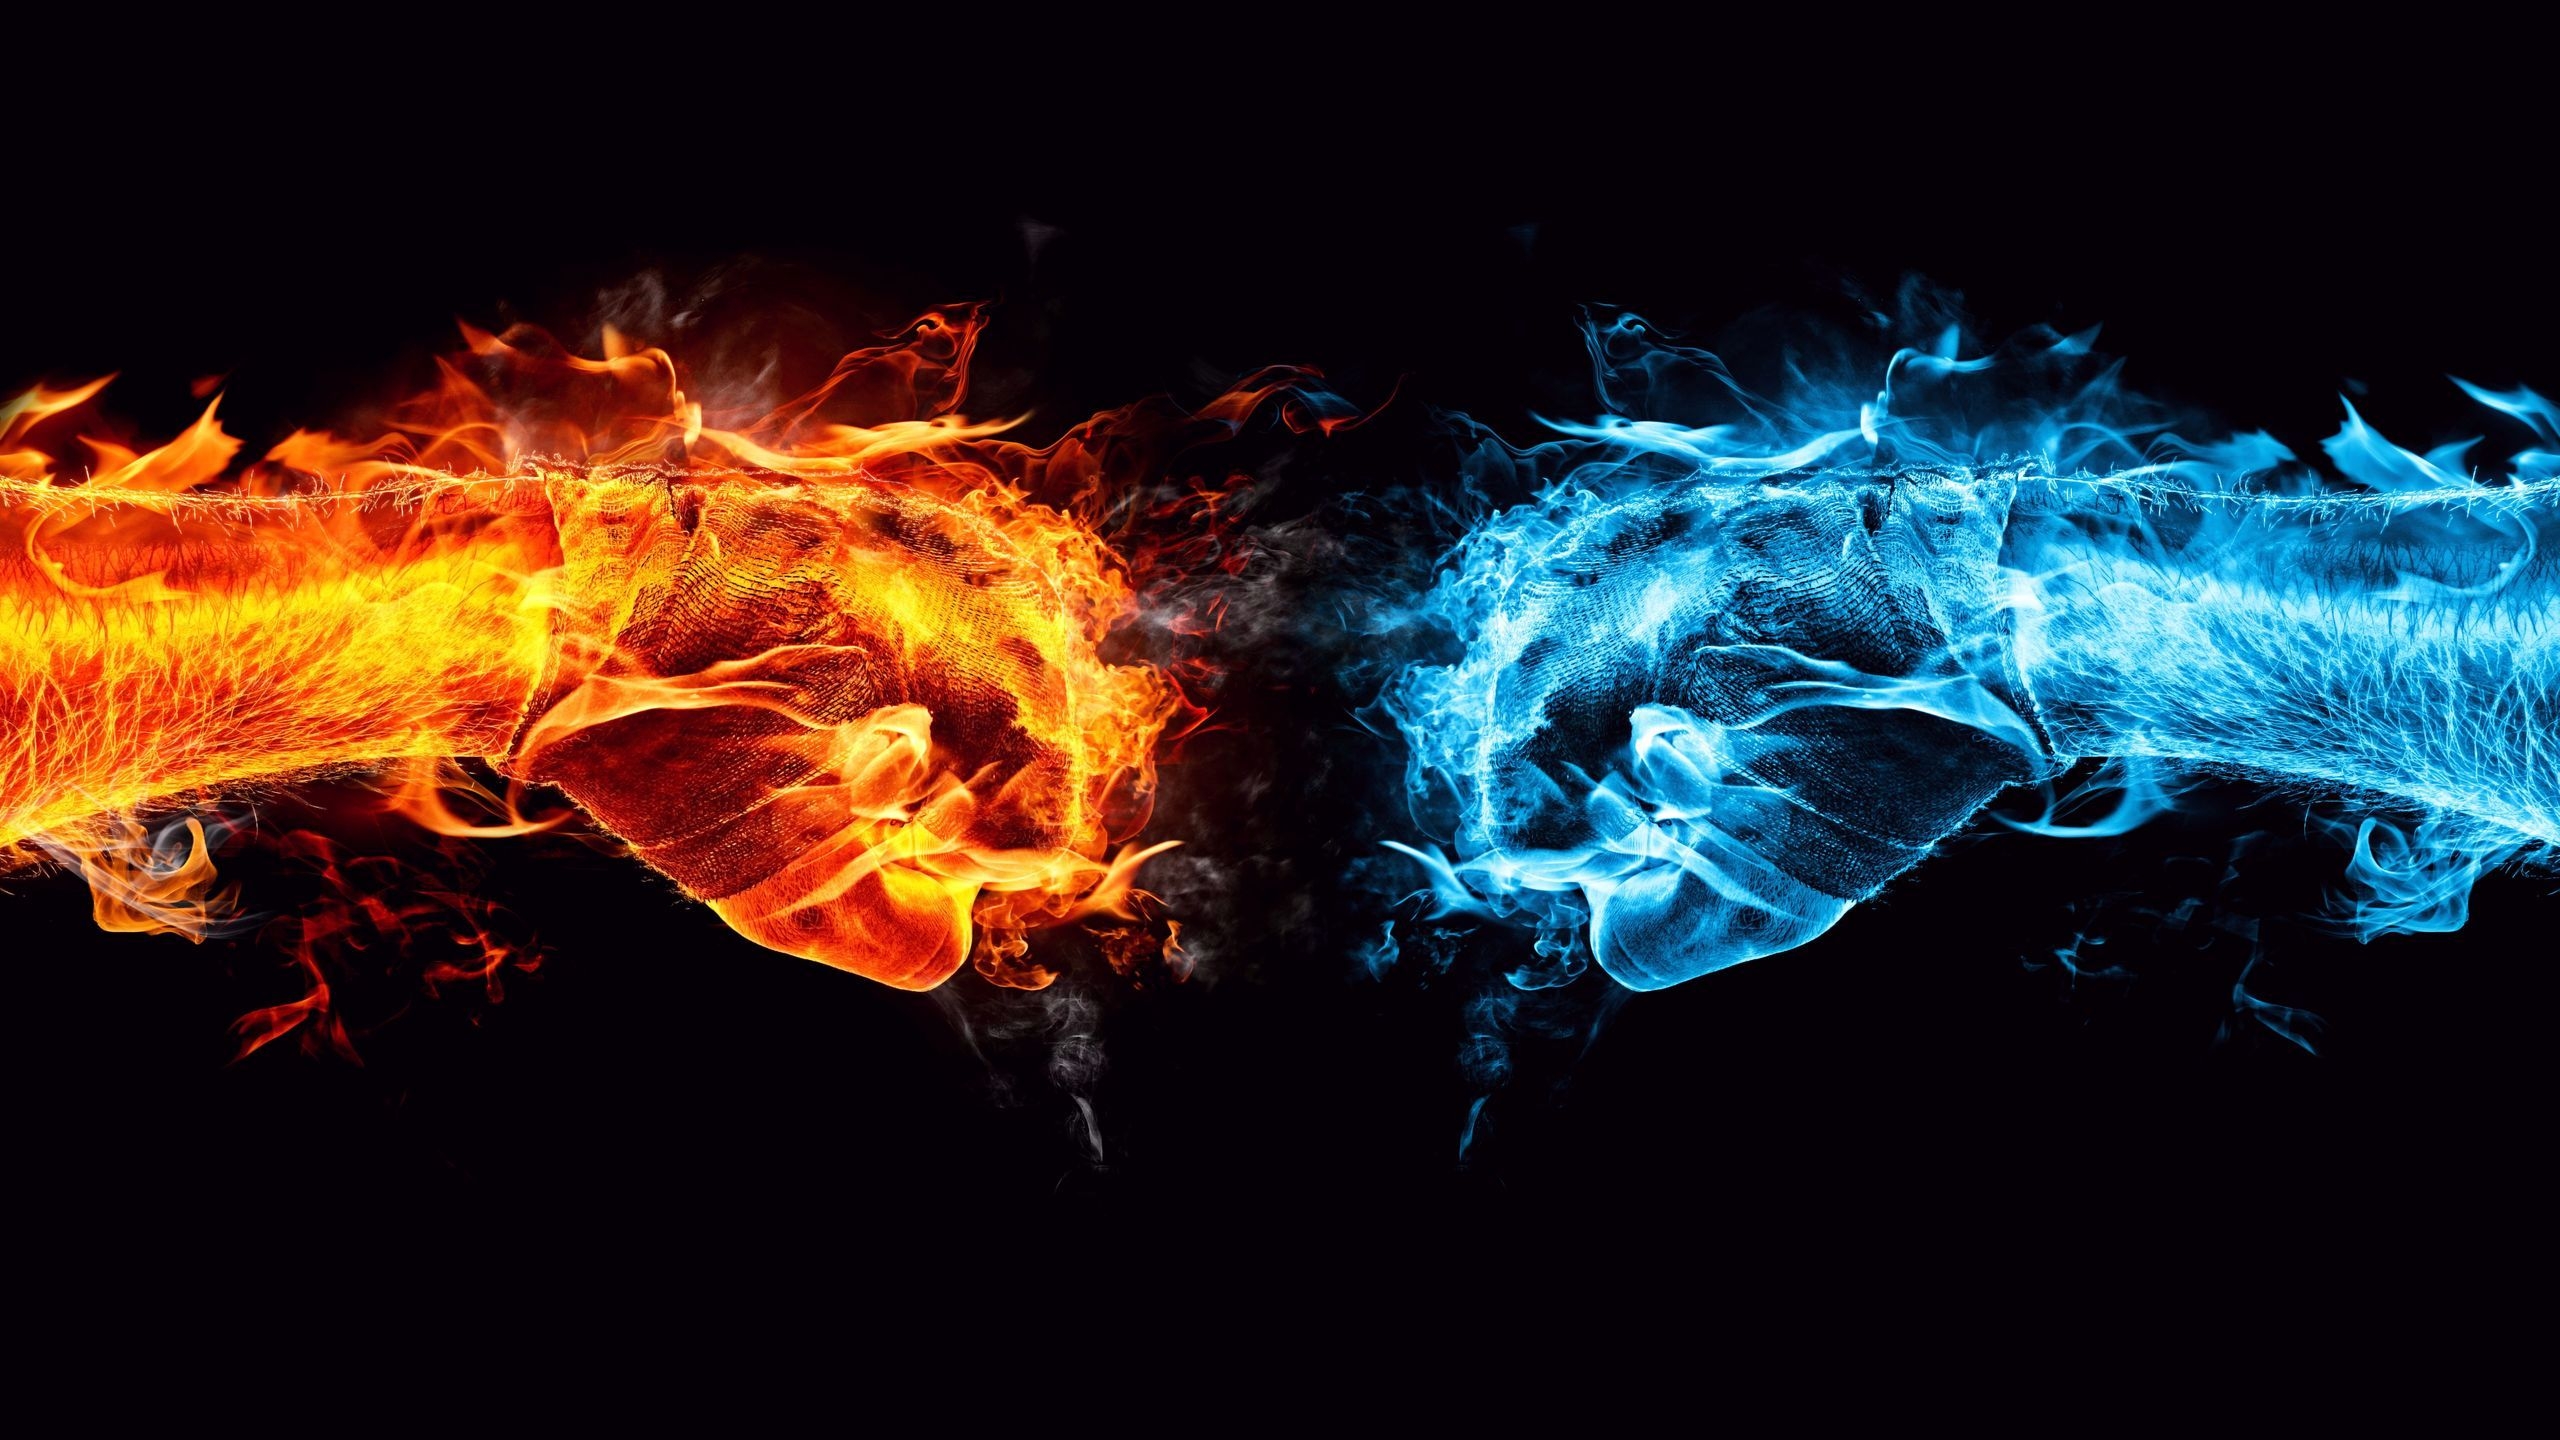 Fire and Ice Conflict for 2560x1440 HDTV resolution